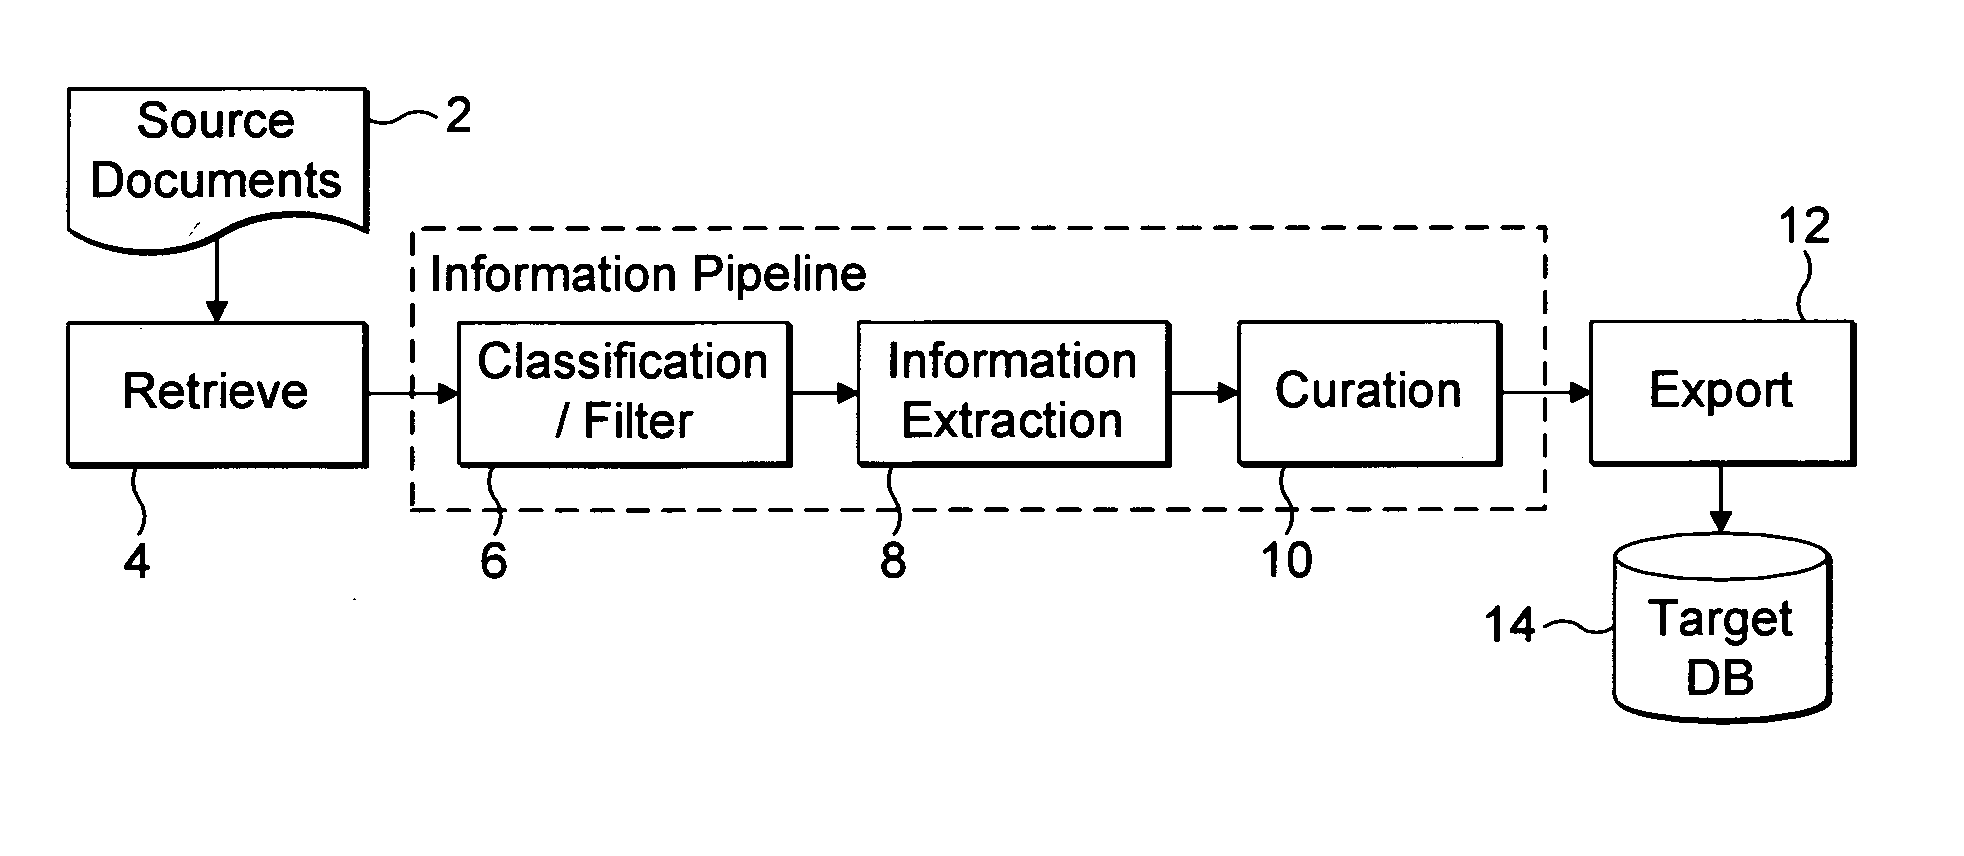 Computer-implemented methods displaying, in a first part, a document and in a second part, a selected index of entities identified in the document